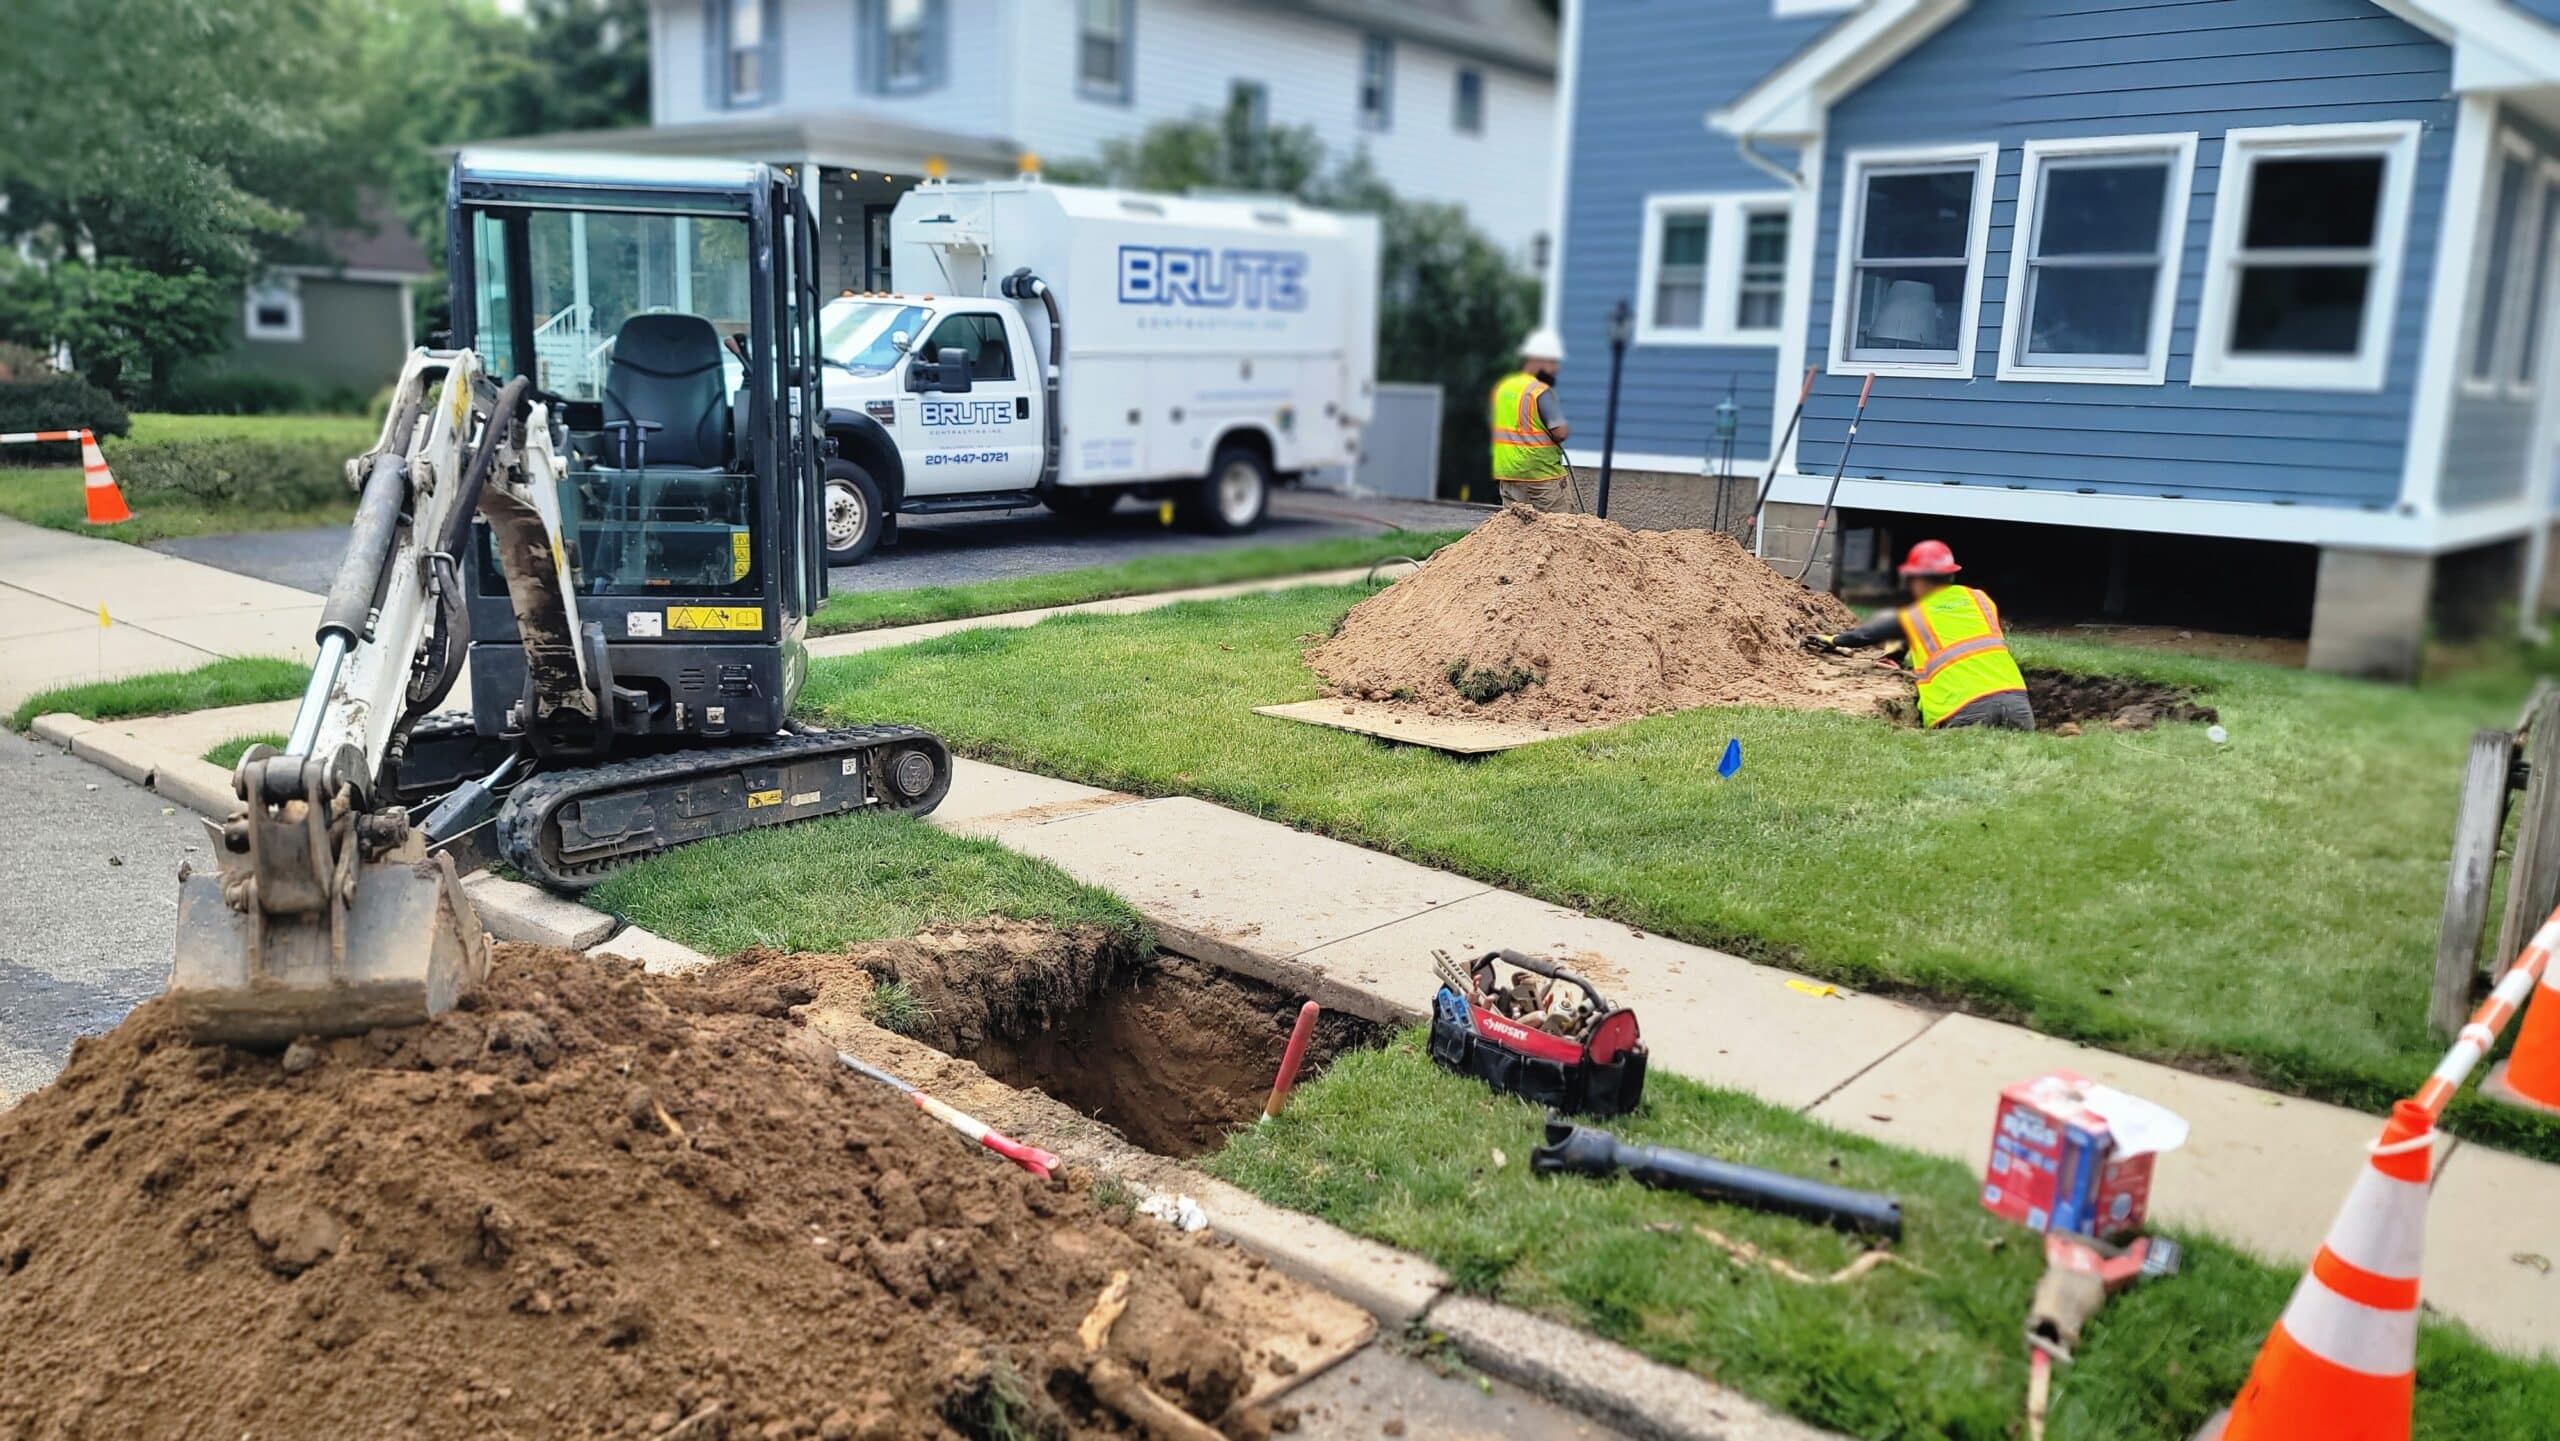 The BRUTE Contracting team working on a main water line repair and replacement service.